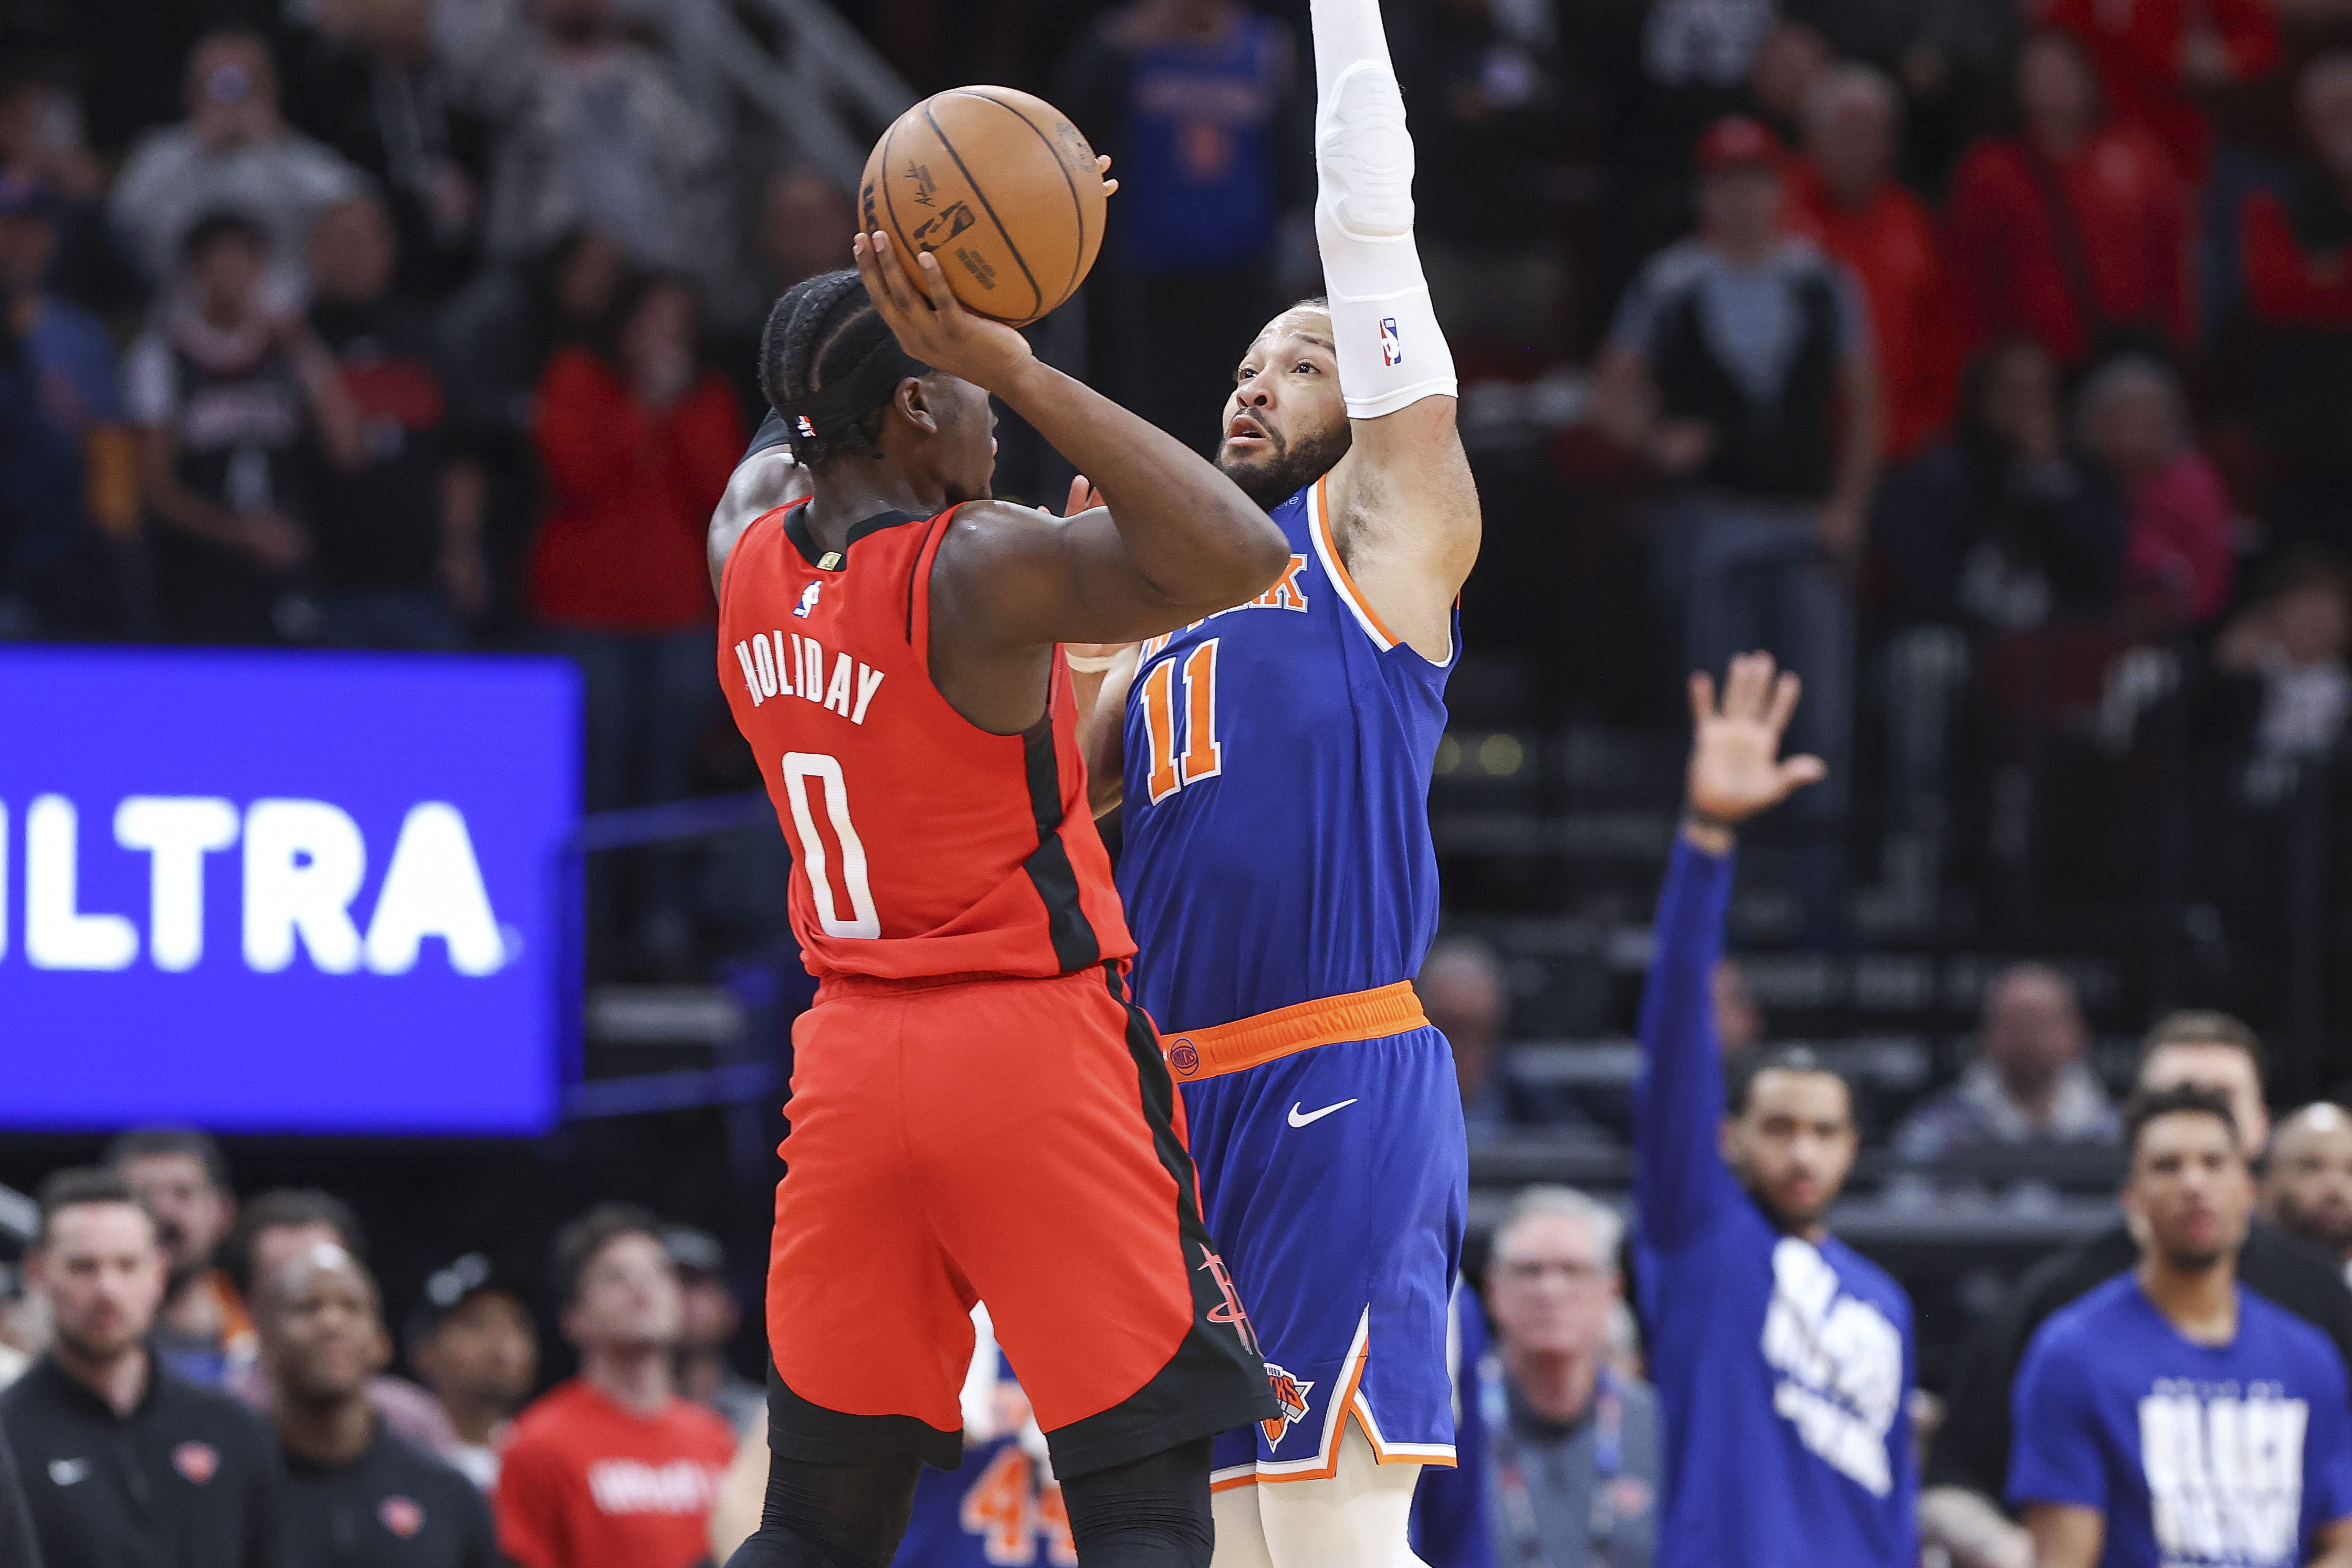 New York Knicks guard Jalen Brunson (11) fouls Houston Rockets guard Aaron Holiday (0) on a play in the final moments of the fourth quarter at Toyota Center